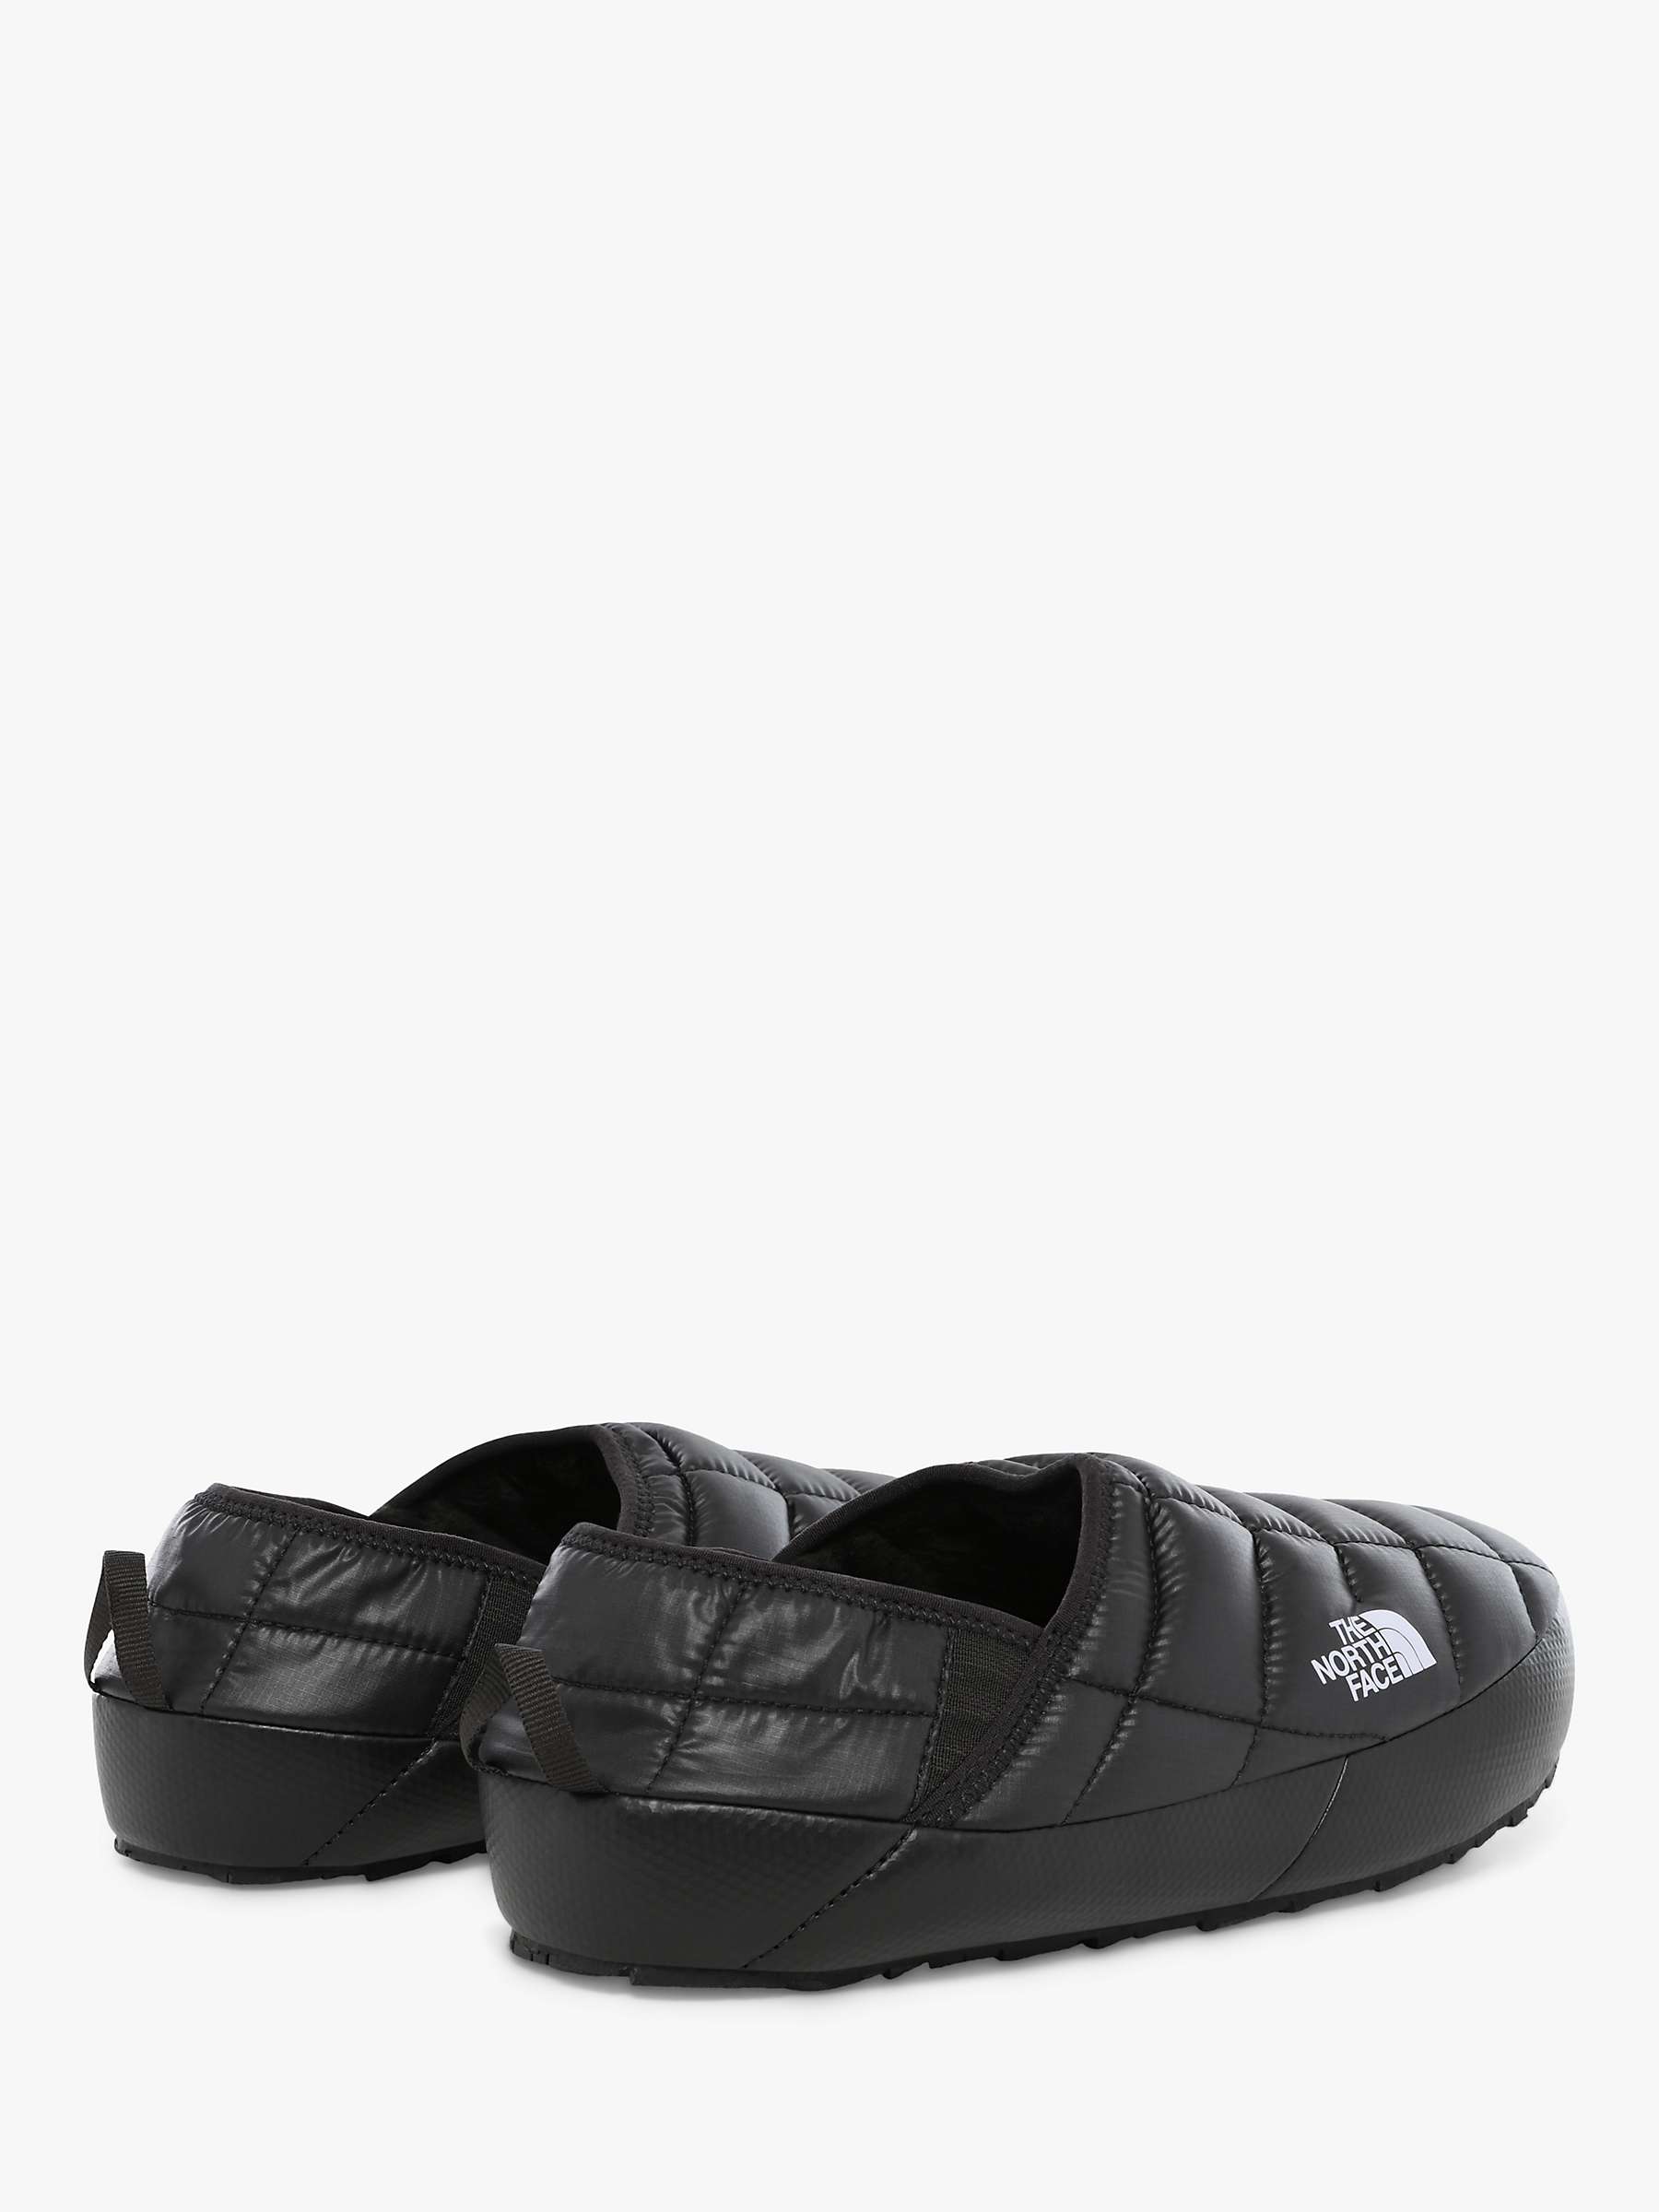 Buy The North Face Thermoball Traction V Men's Mules Online at johnlewis.com